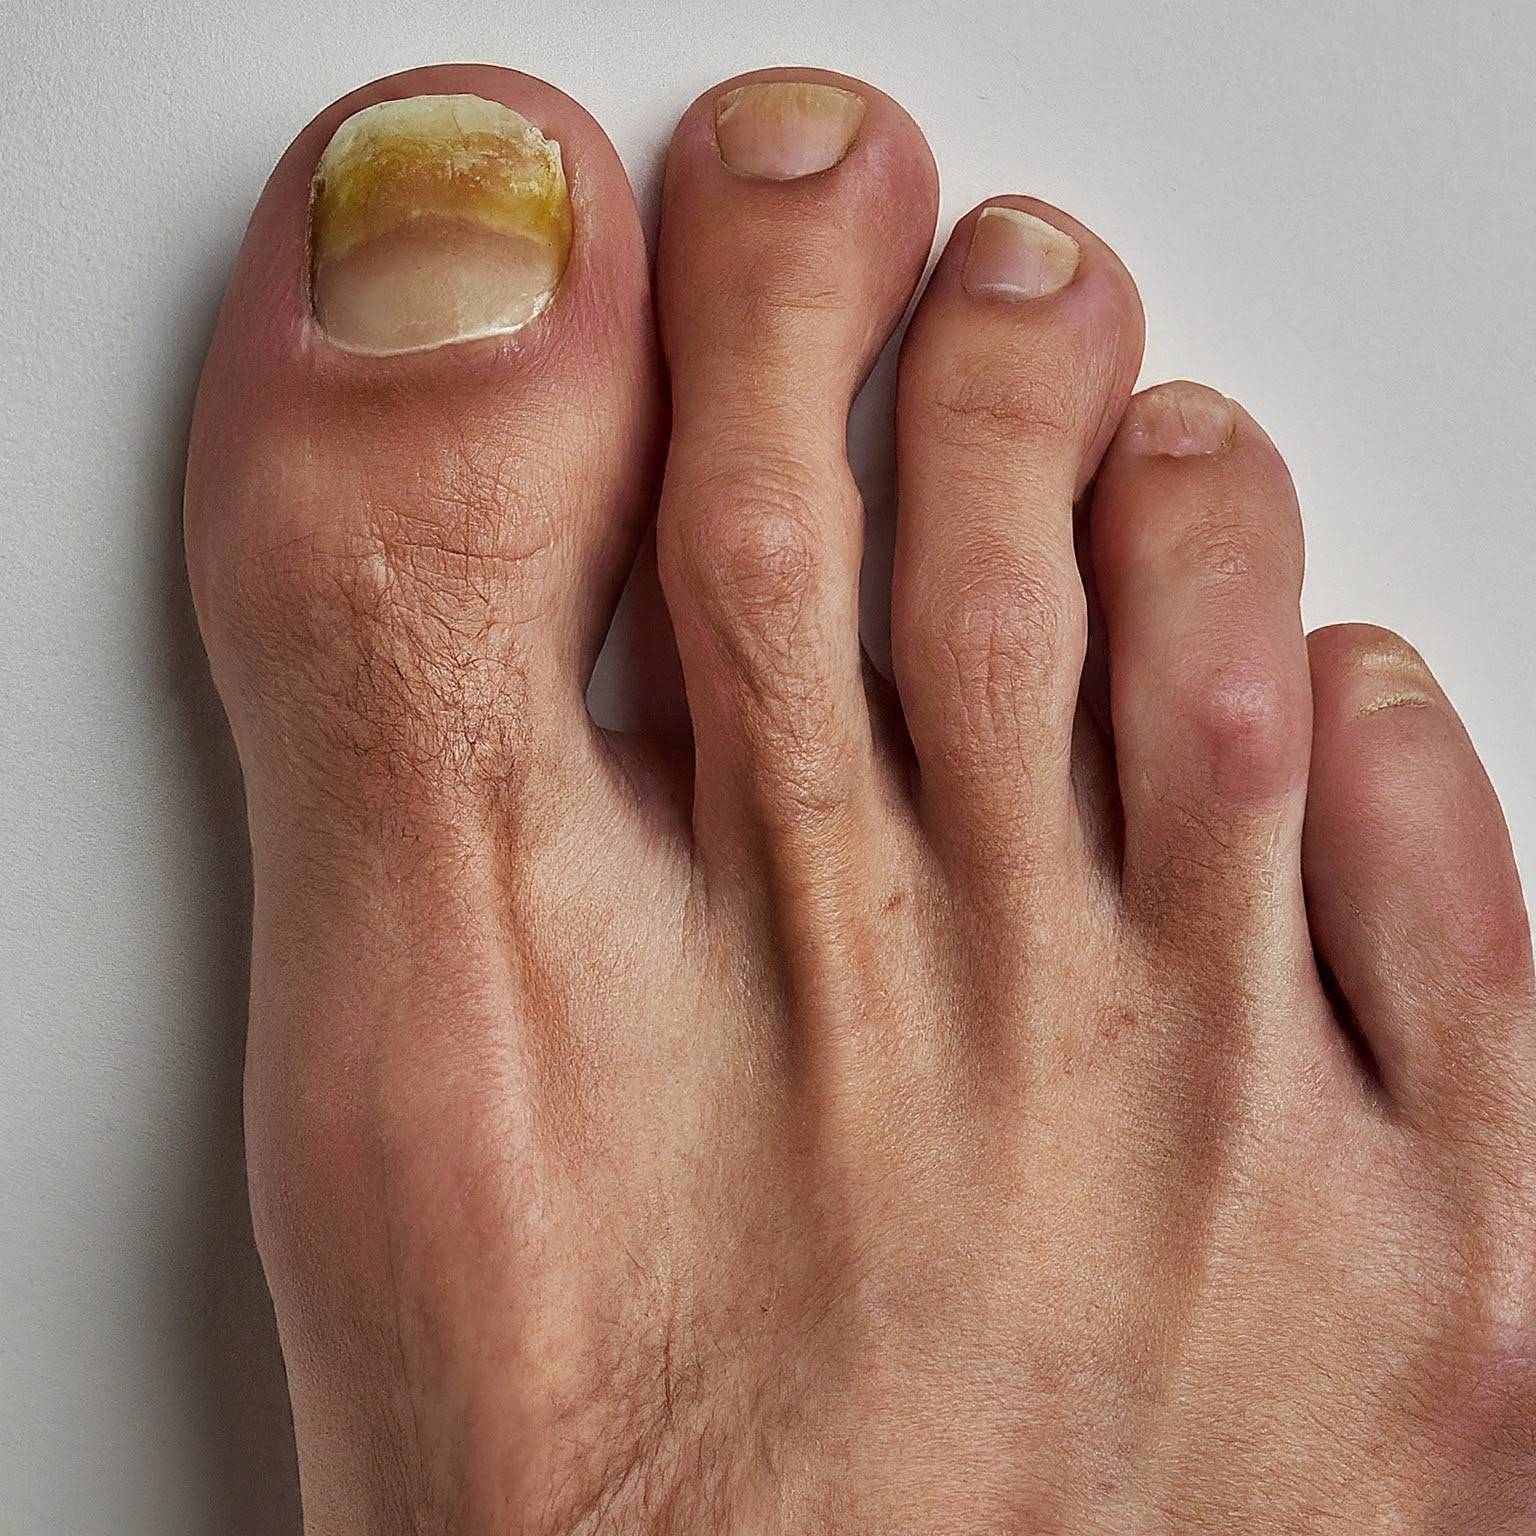 Early Stage Toenail Fungus